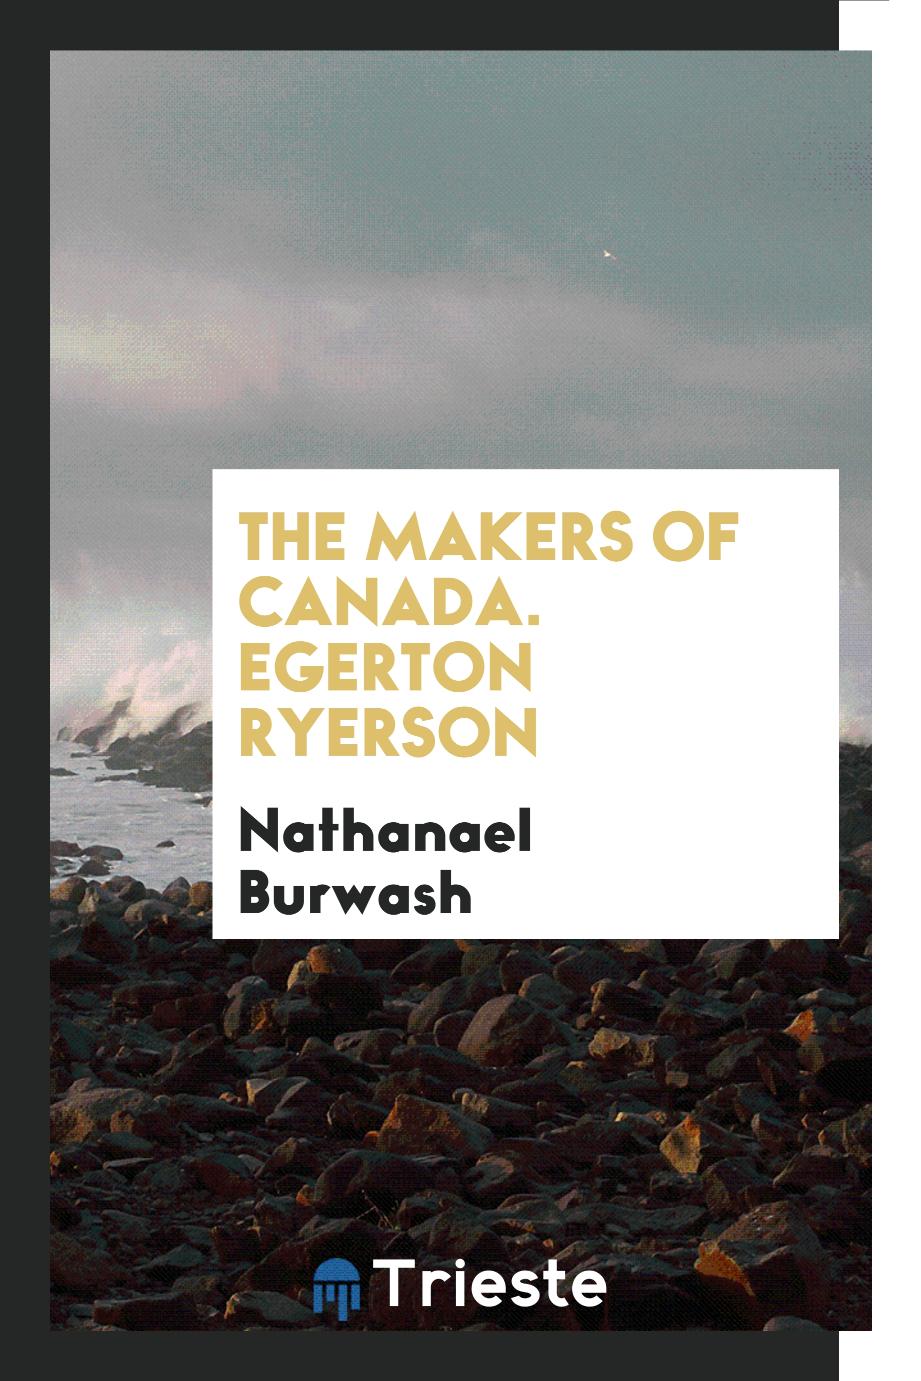 The Makers of Canada. Egerton Ryerson